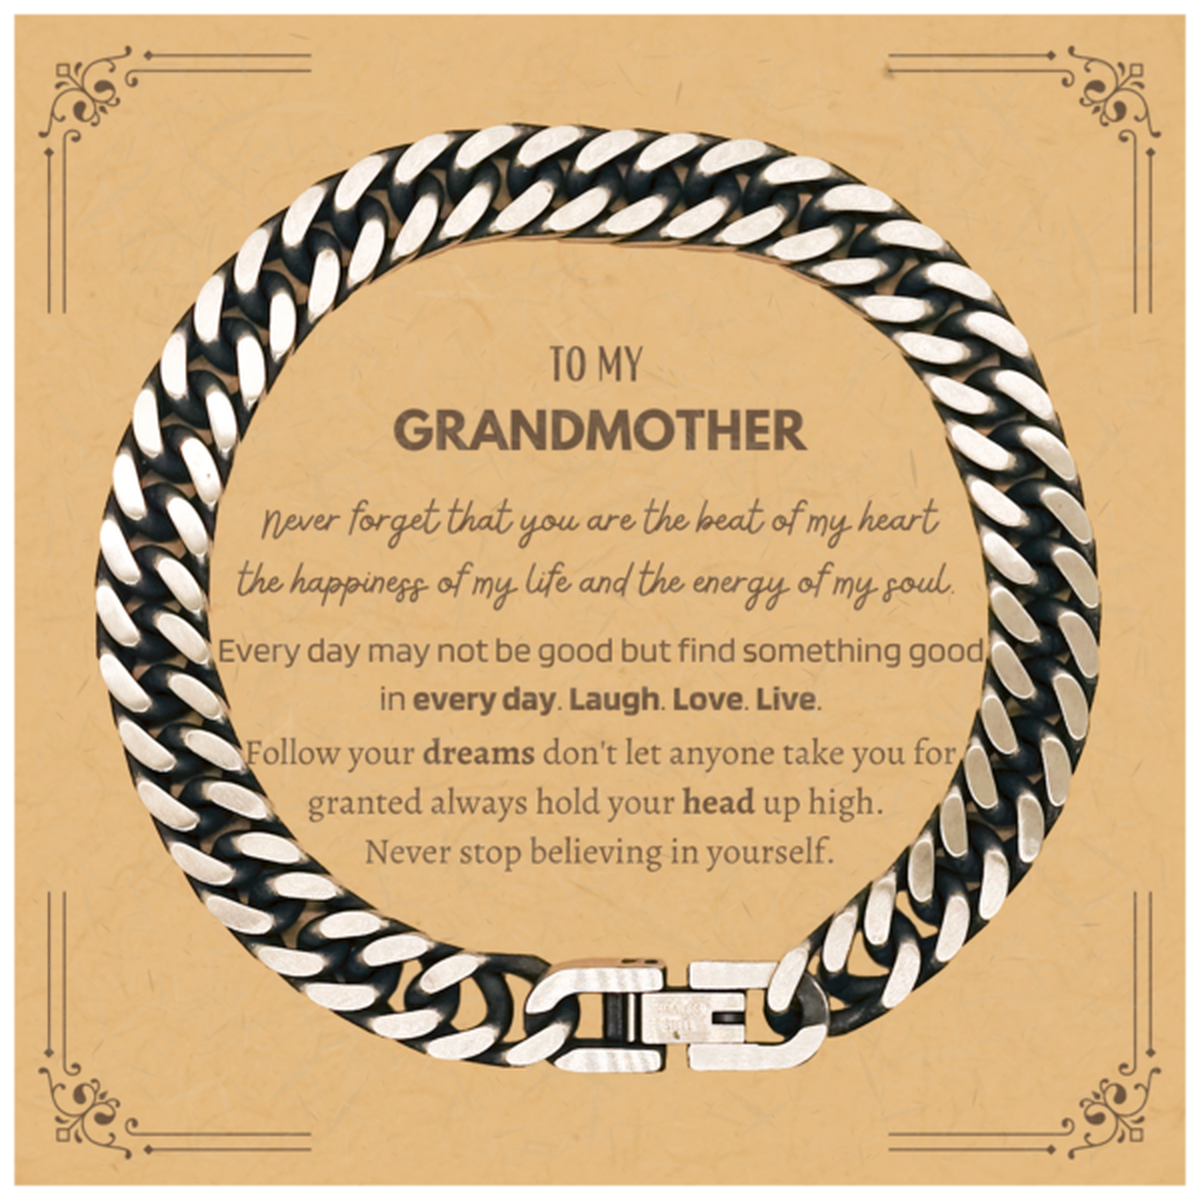 To My Grandmother Message Card Gifts, Christmas Grandmother Cuban Link Chain Bracelet Present, Birthday Unique Motivational For Grandmother, To My Grandmother Never forget that you are the beat of my heart the happiness of my life and the energy of my sou